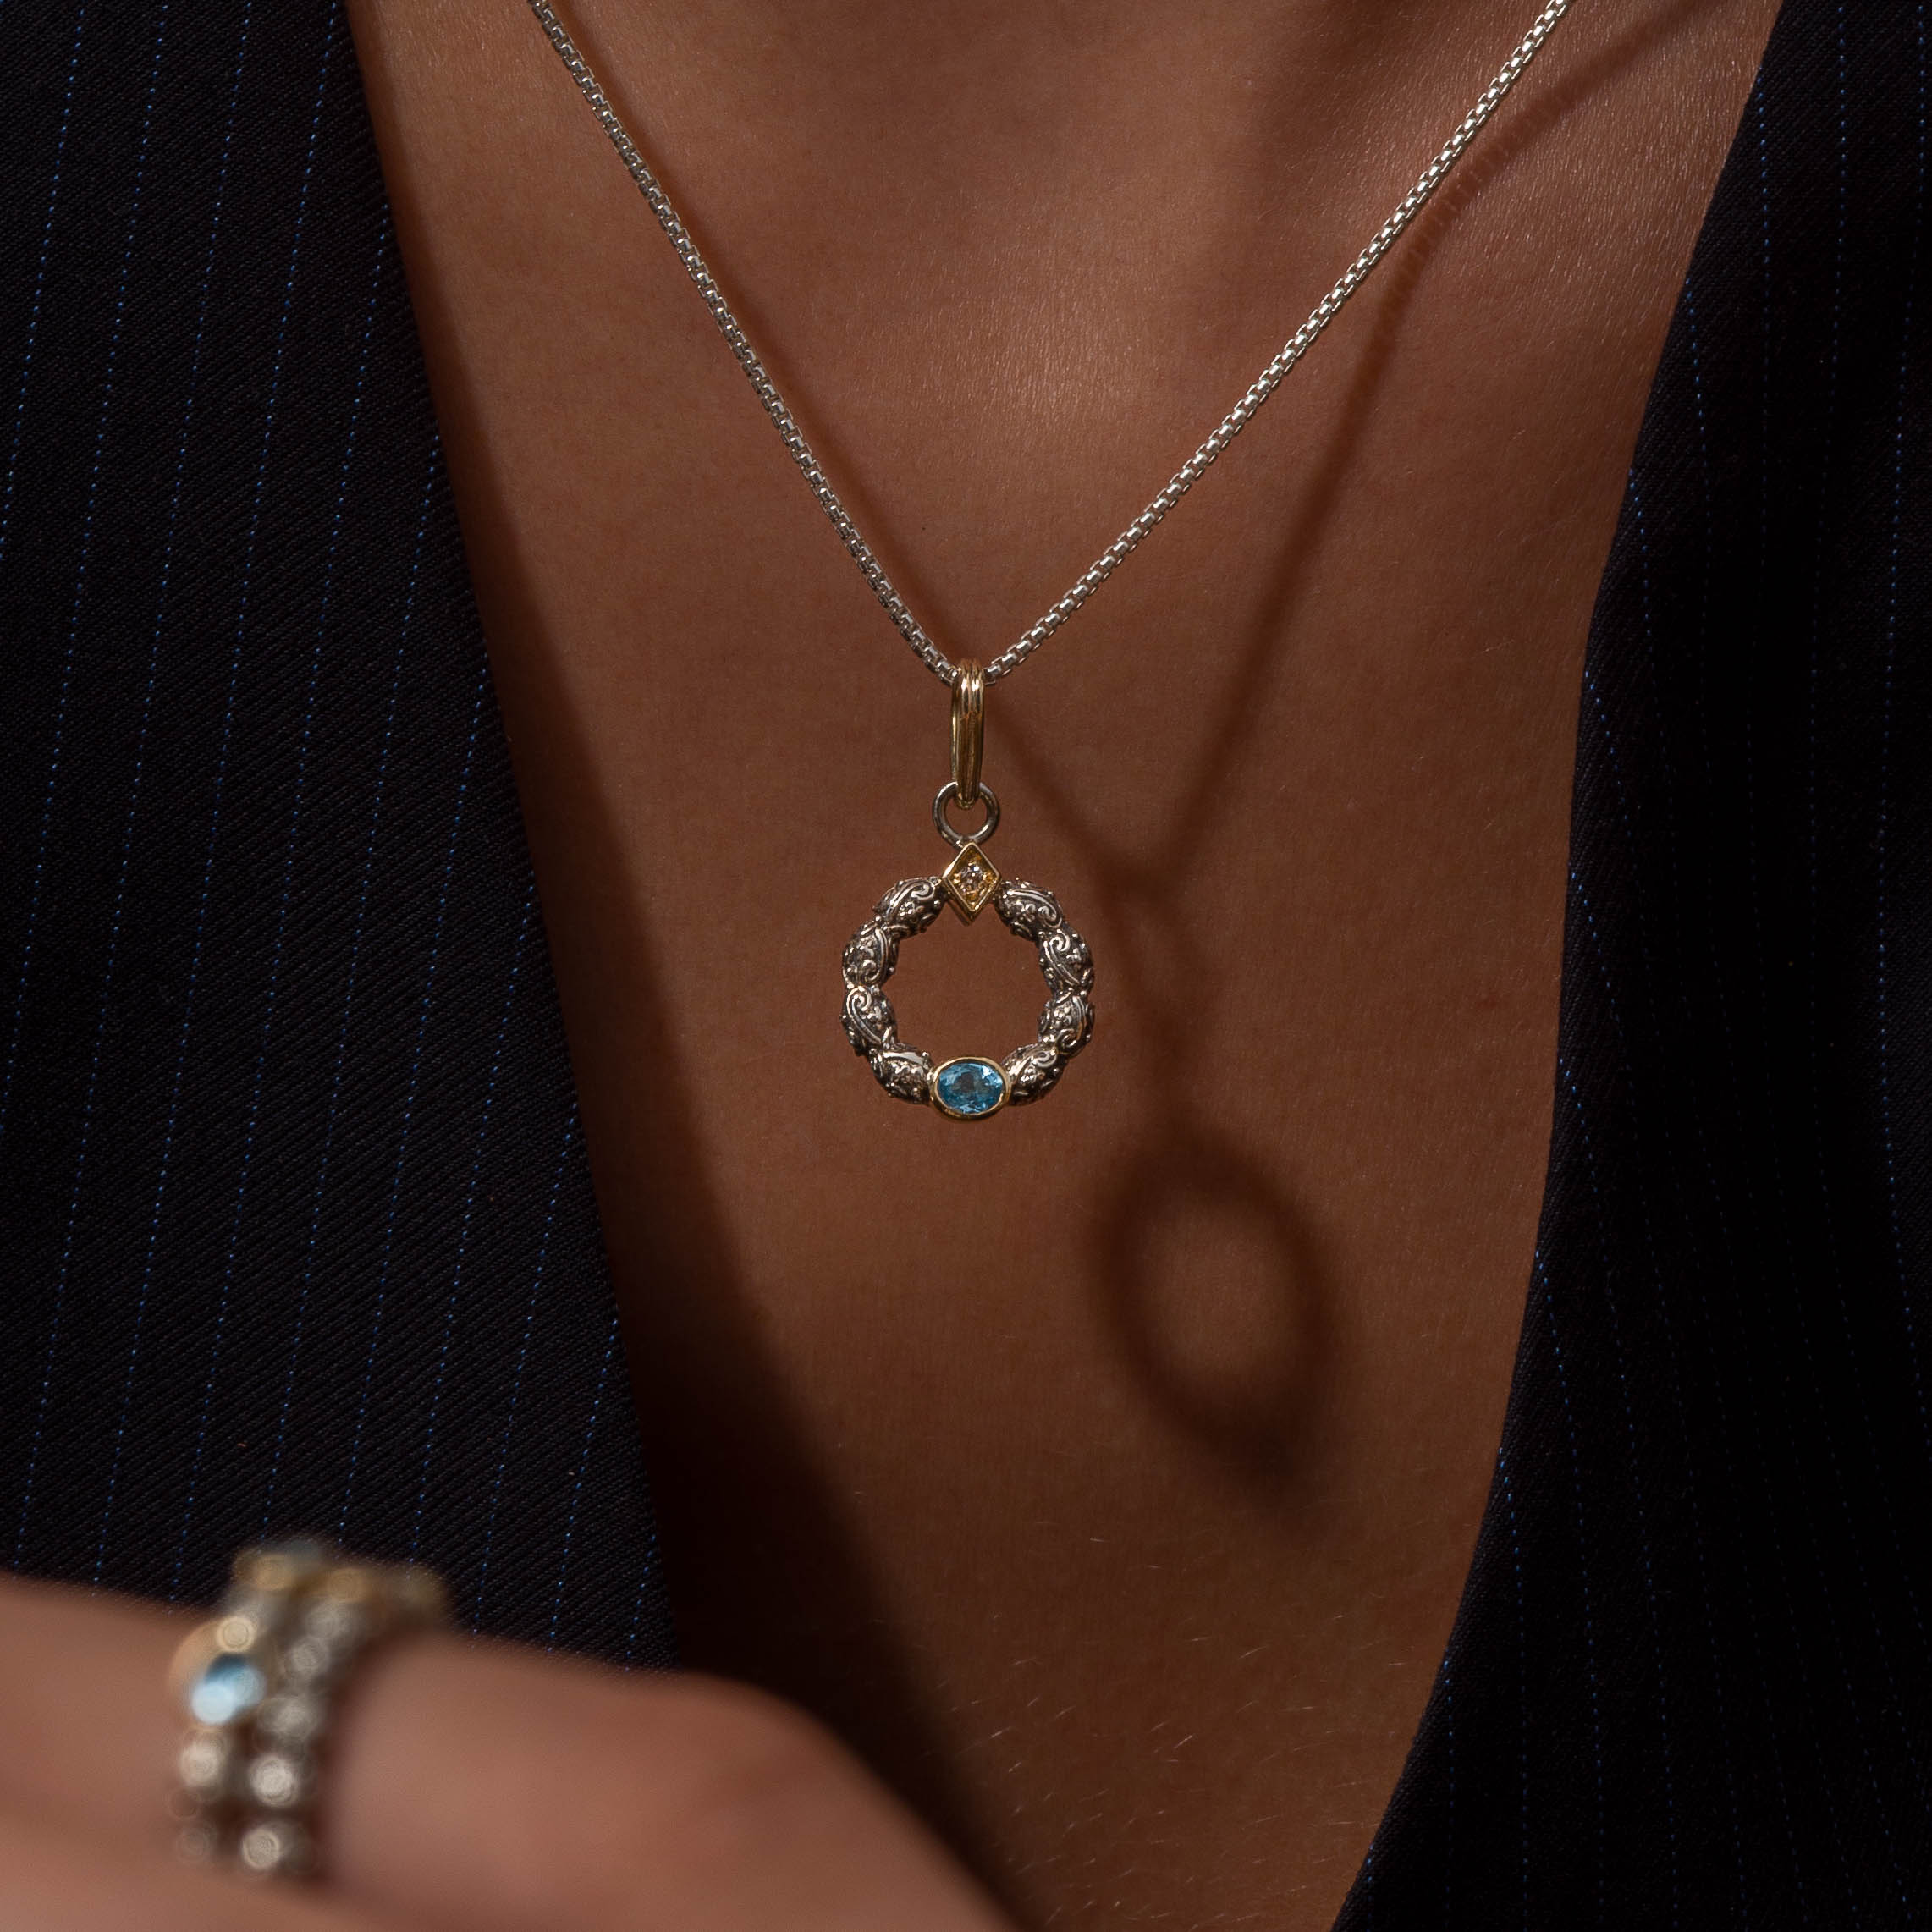 Eve cycle pendant in 18K Gold Sterling silver and Gemstones